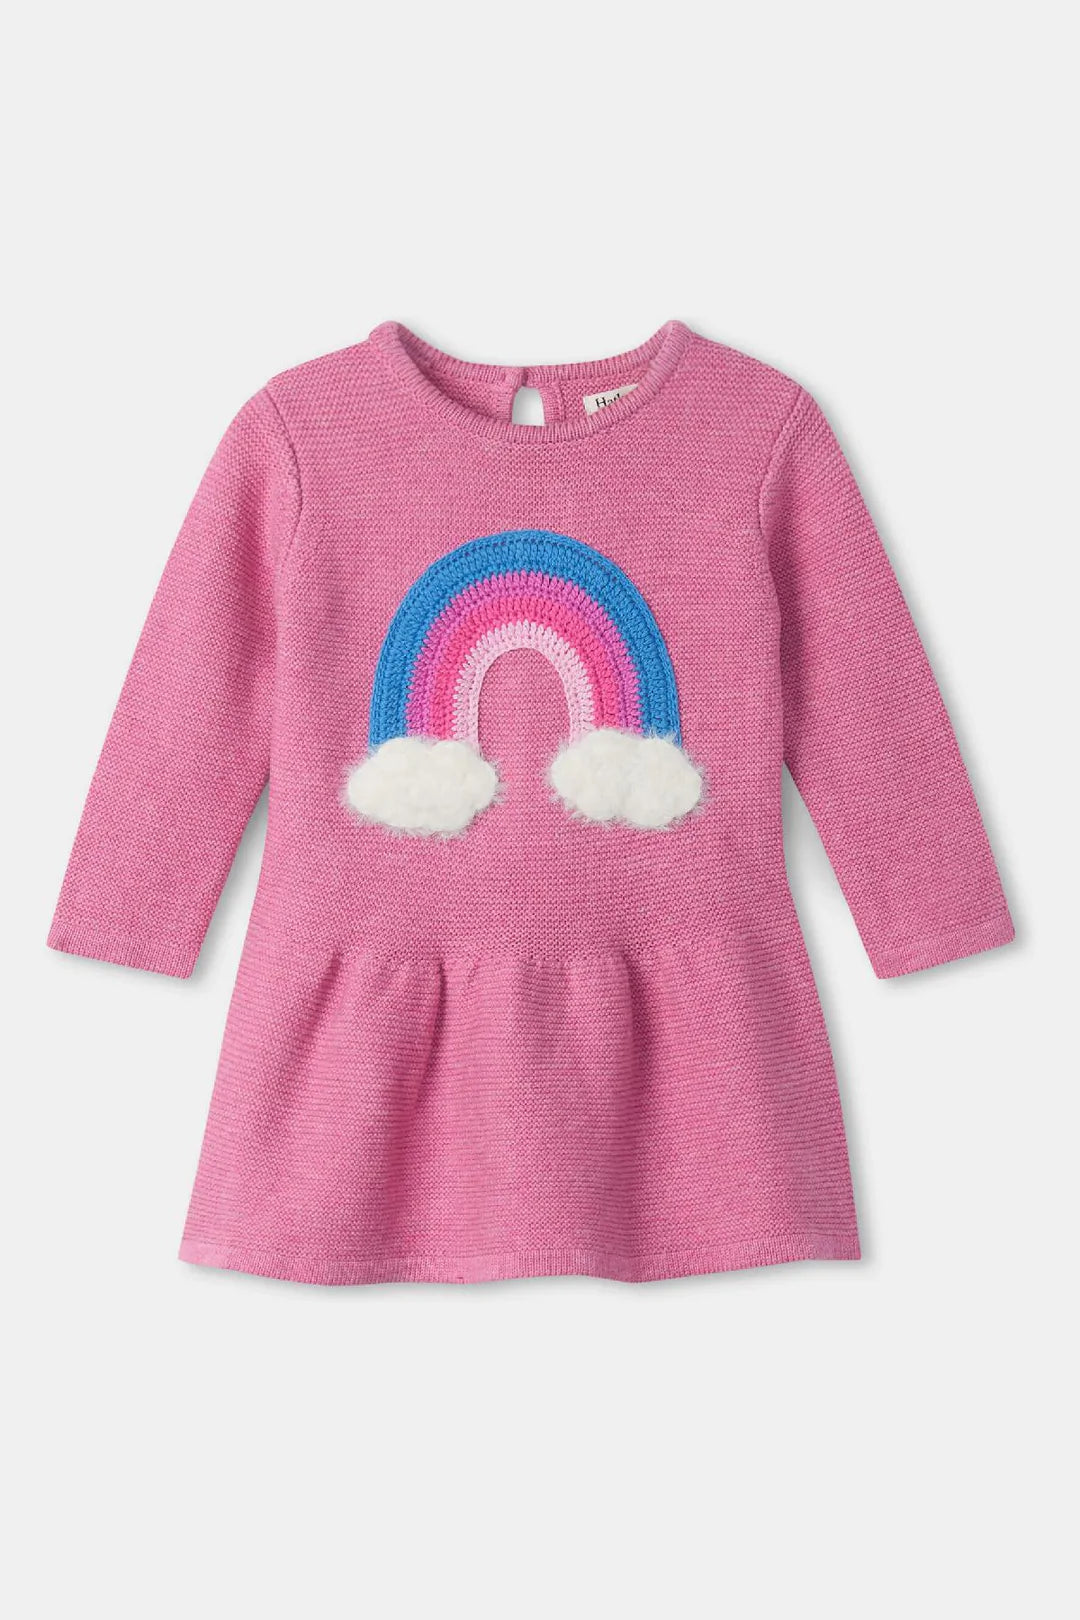 Over the Rainbow Sweater Dress  - Doodlebug's Children's Boutique